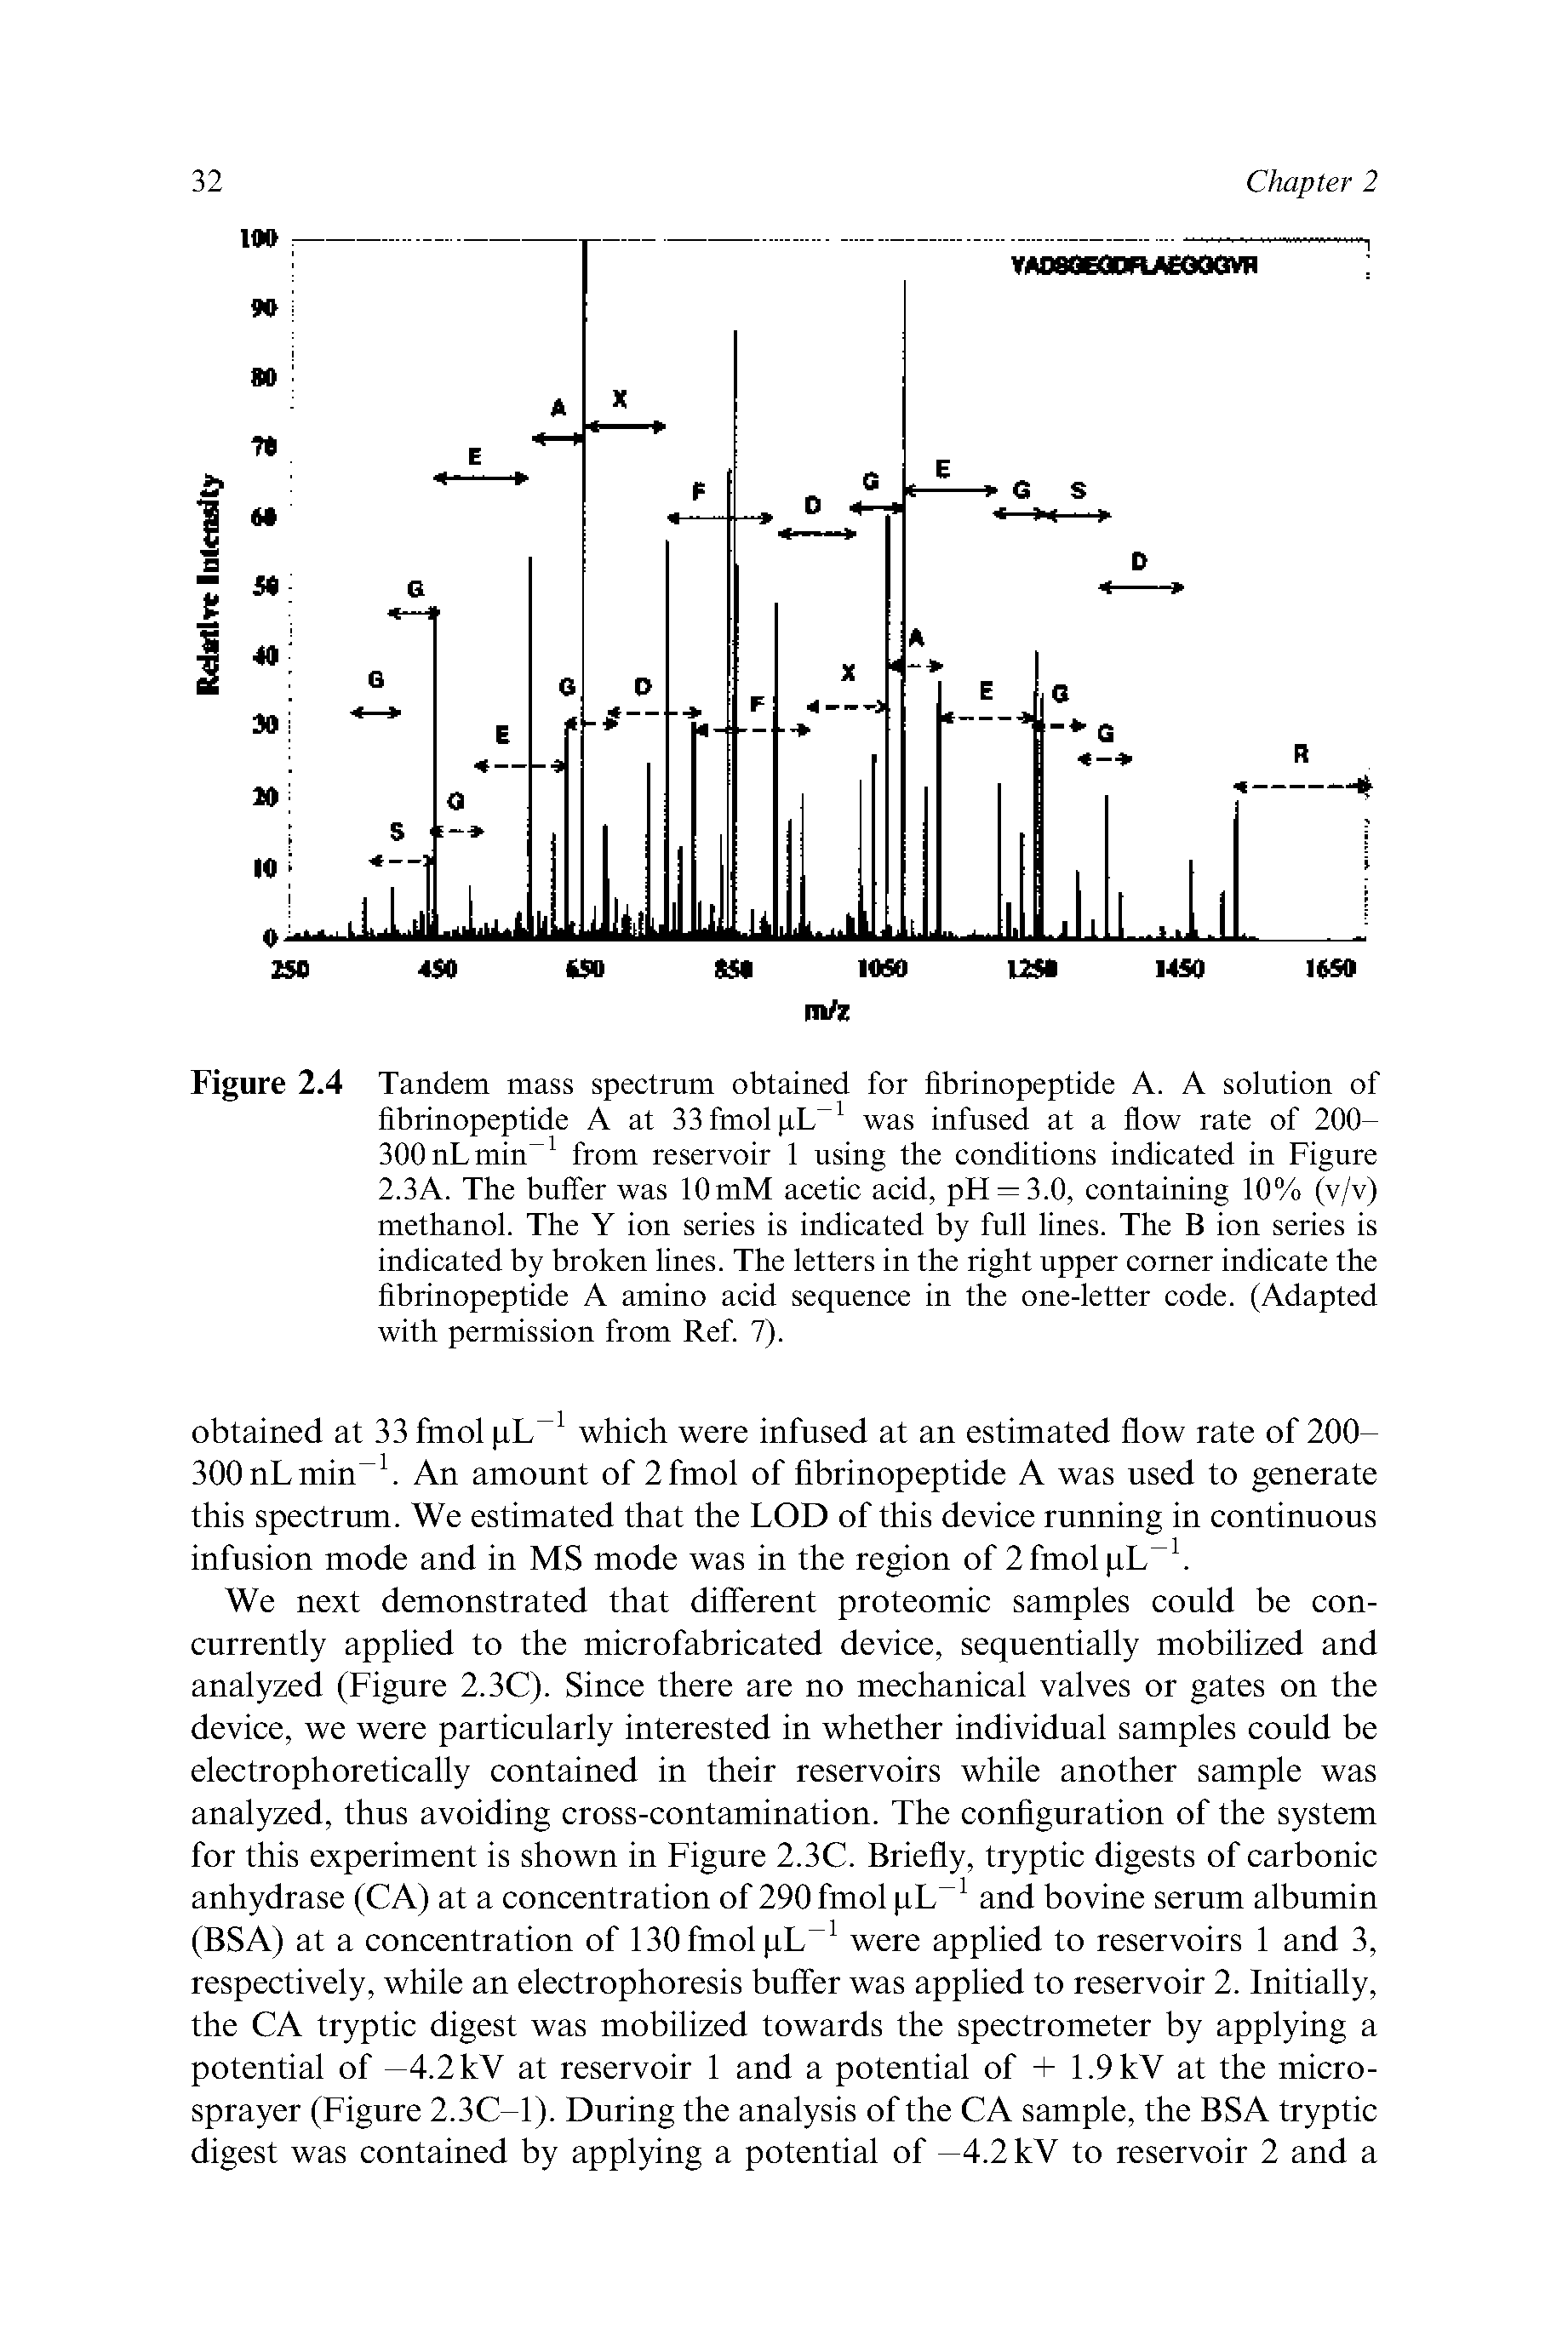 Figure 2.4 Tandem mass spectrum obtained for fibrinopeptide A. A solution of fibrinopeptide A at 33fmol j.L 1 was infused at a flow rate of 200-300nLmin 1 from reservoir 1 using the conditions indicated in Figure 2.3A. The buffer was 10mM acetic acid, pH = 3.0, containing 10% (v/v) methanol. The Y ion series is indicated by full lines. The B ion series is indicated by broken lines. The letters in the right upper corner indicate the fibrinopeptide A amino acid sequence in the one-letter code. (Adapted with permission from Ref. 7).